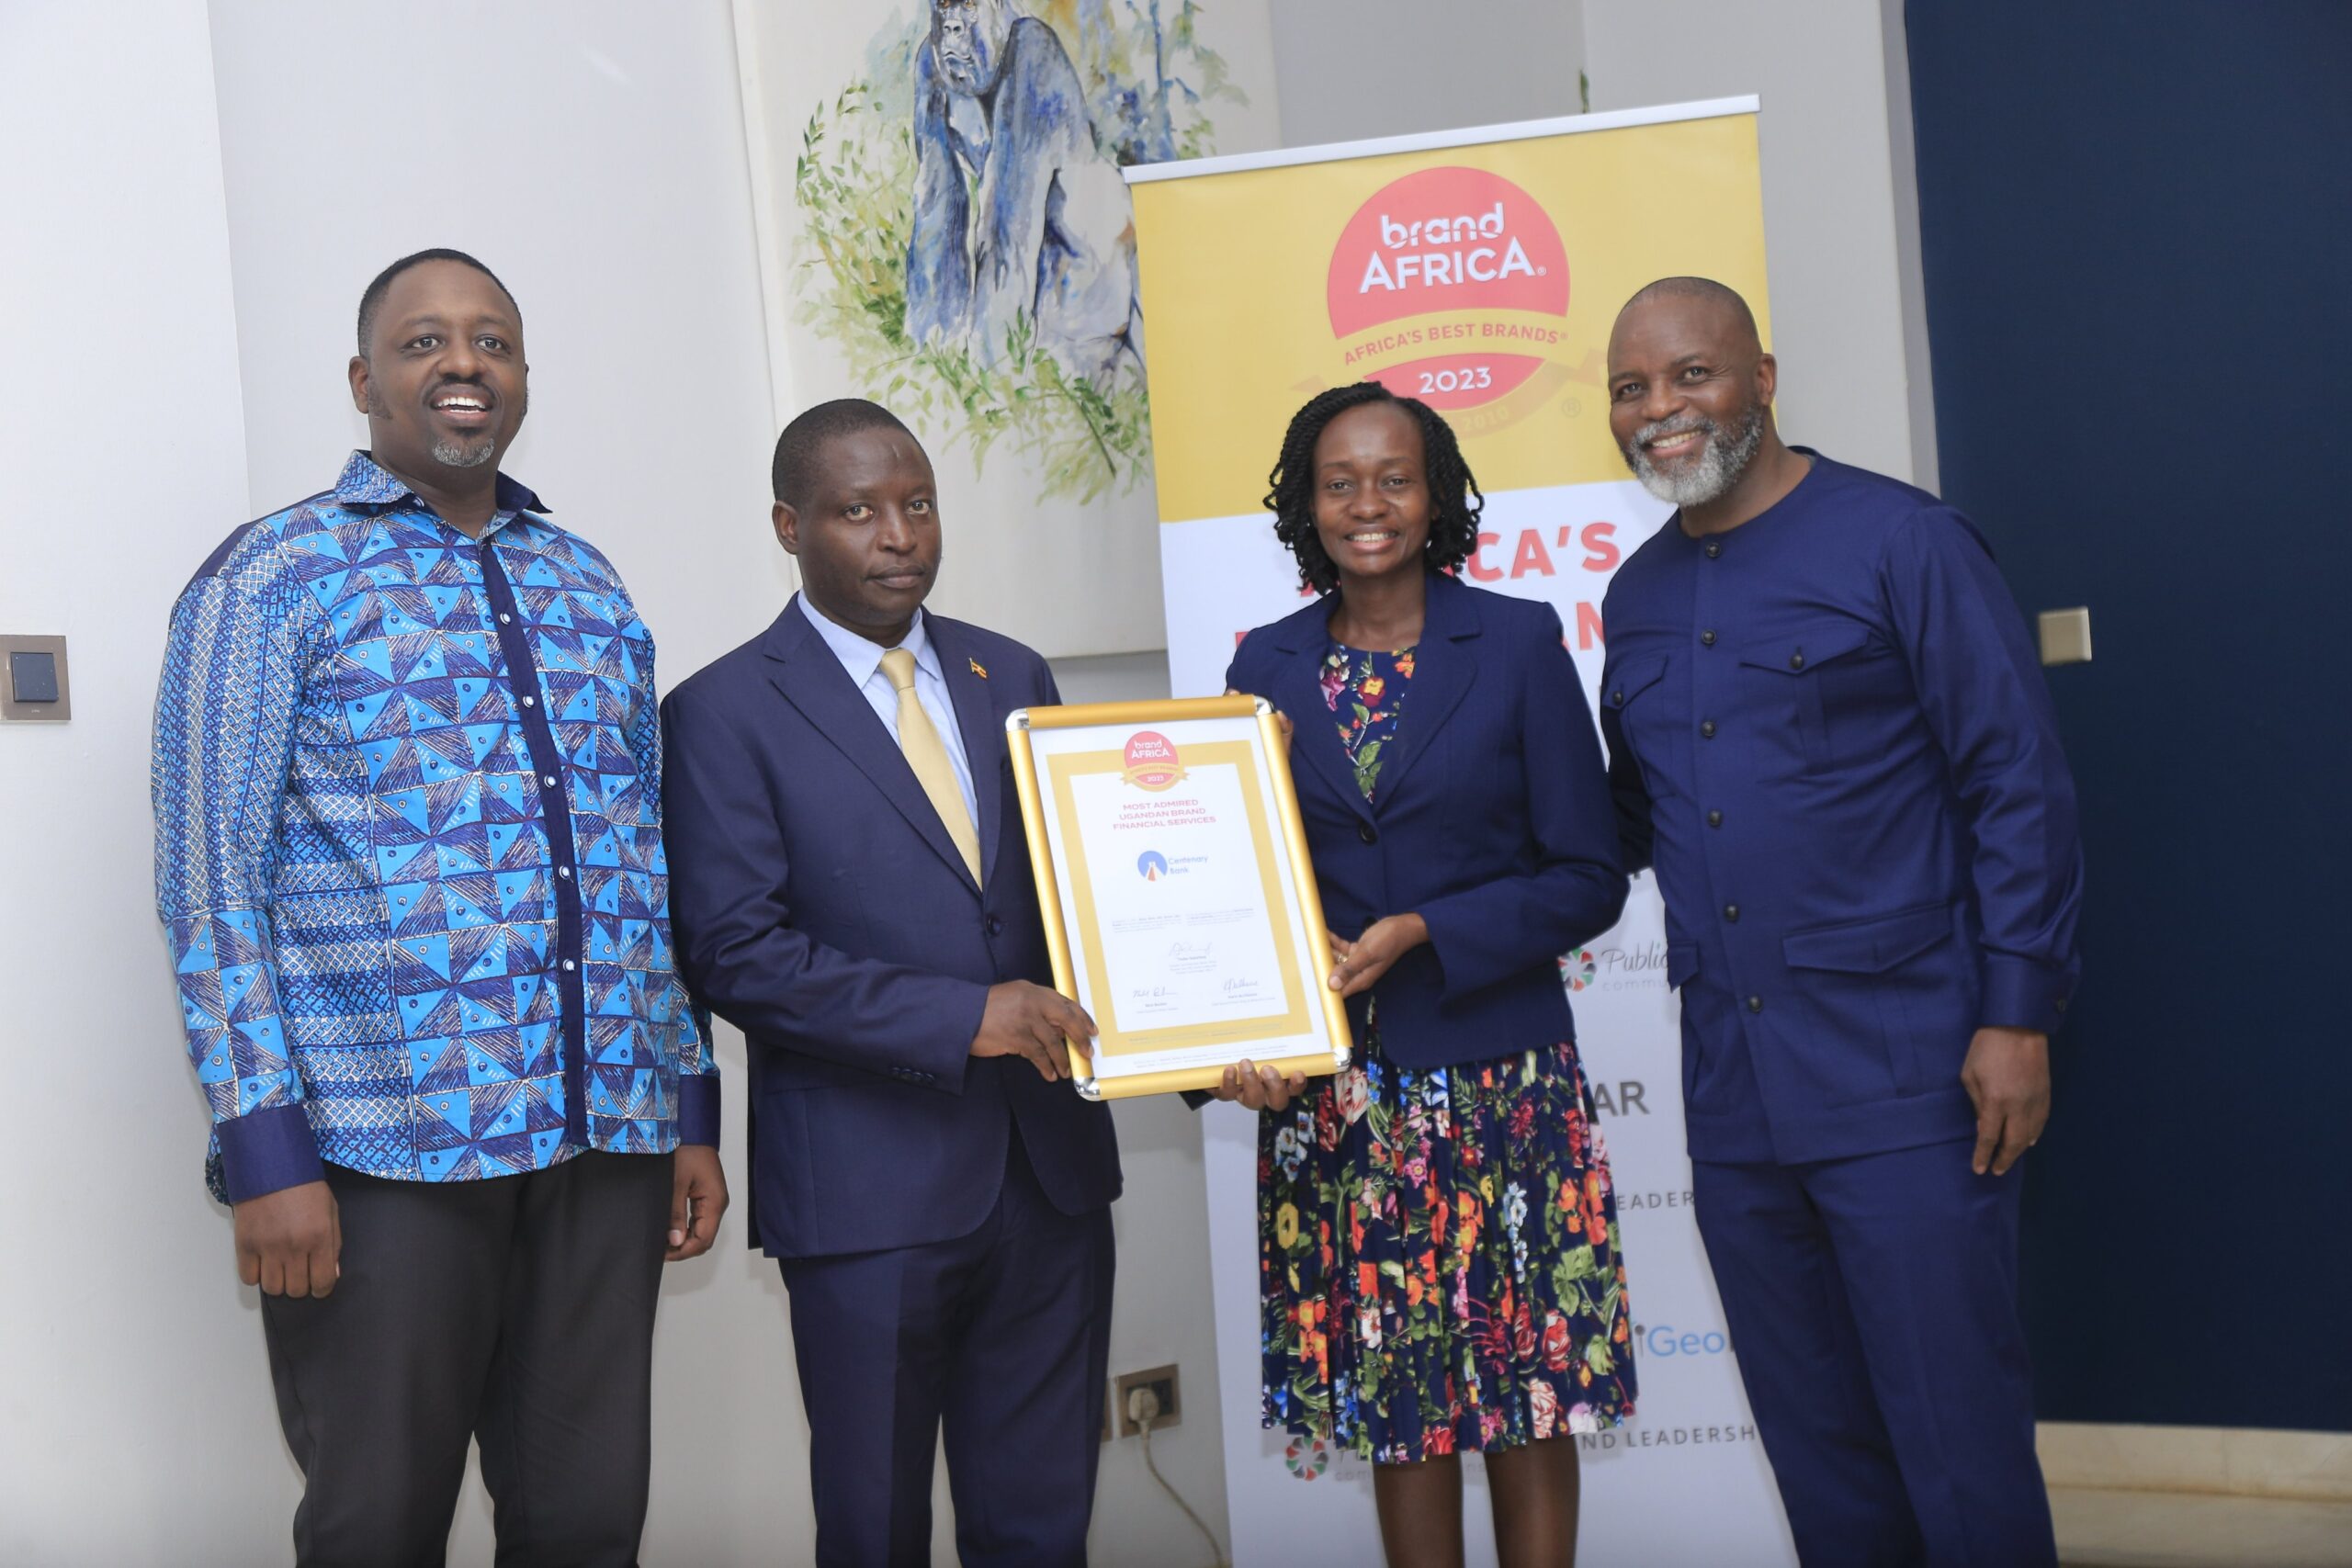 Centenary Bank named Uganda’s Most Admired Bank for doing good in society, people and environment at the 2023 Brand Africa Awards.